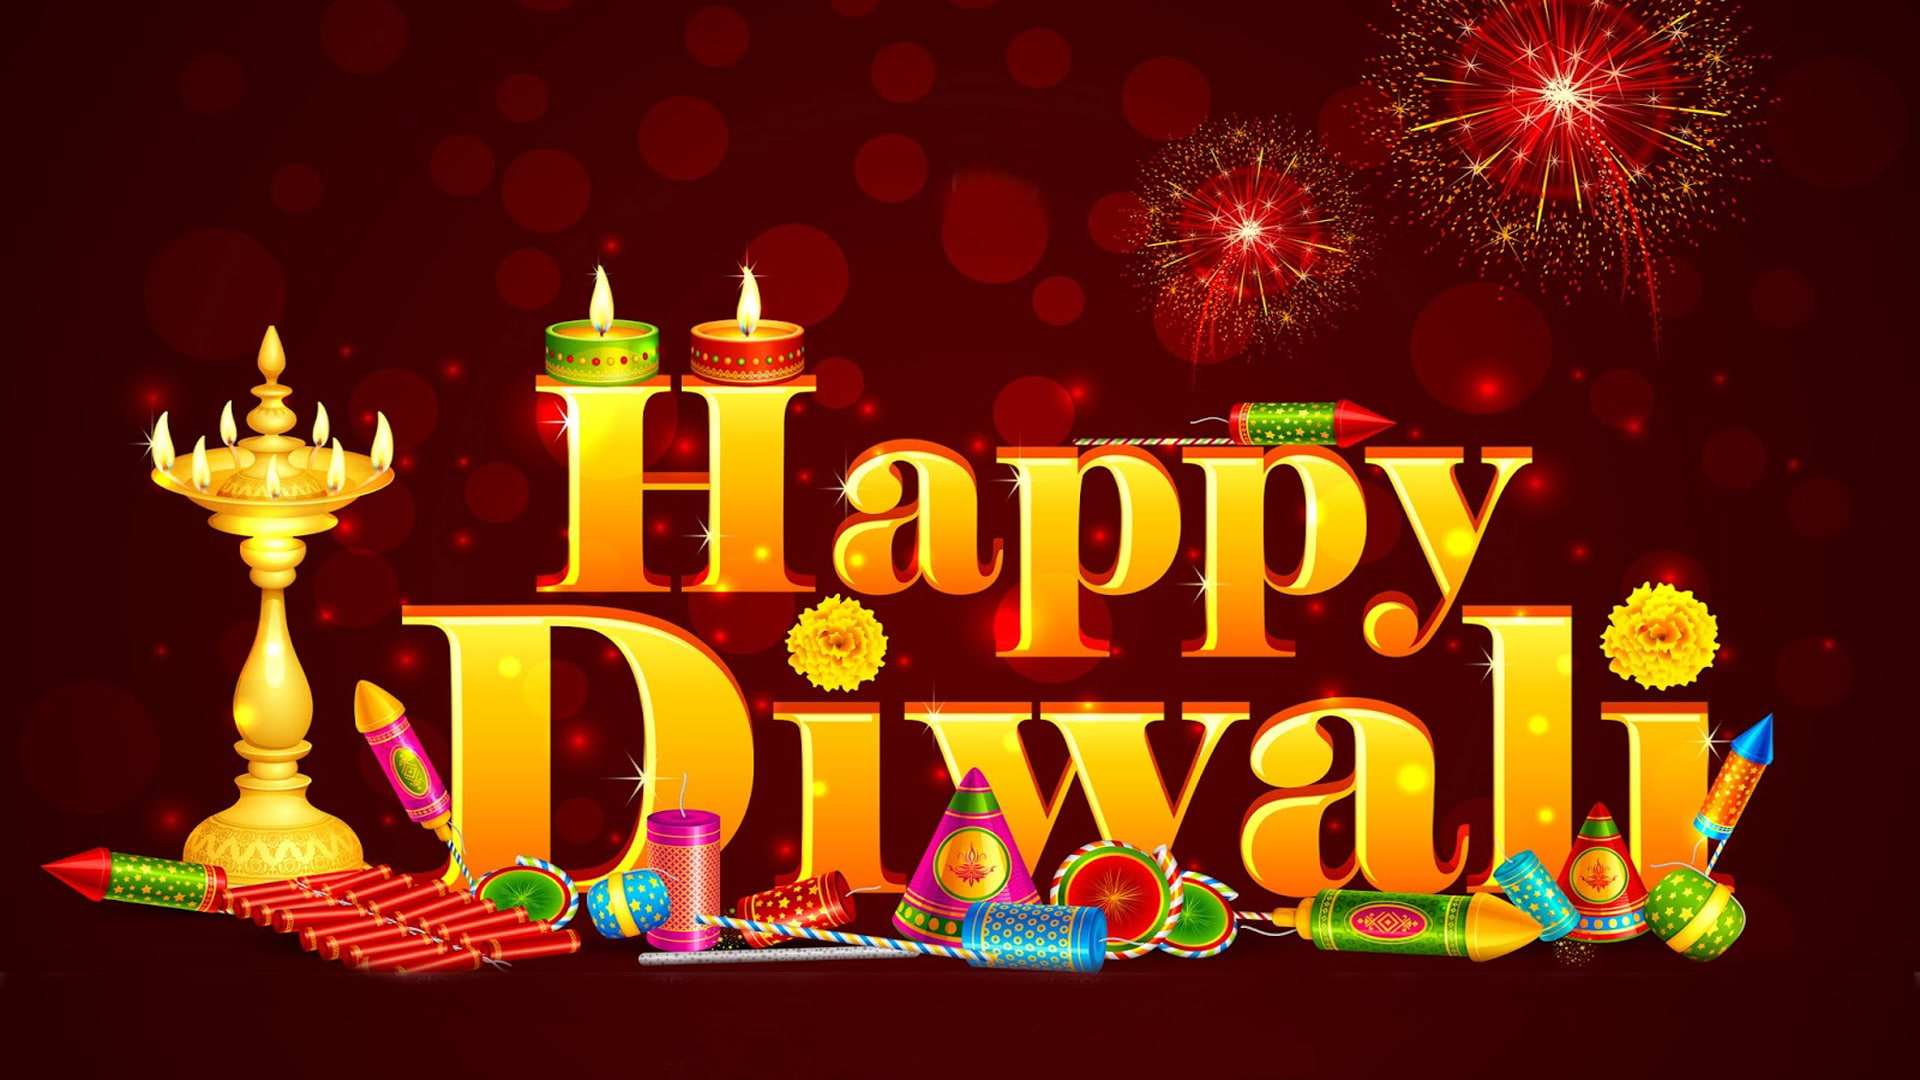 Happy Diwali Wishes 2021: Status, Image, Messages, SMS, HD wallpaper, image, gif